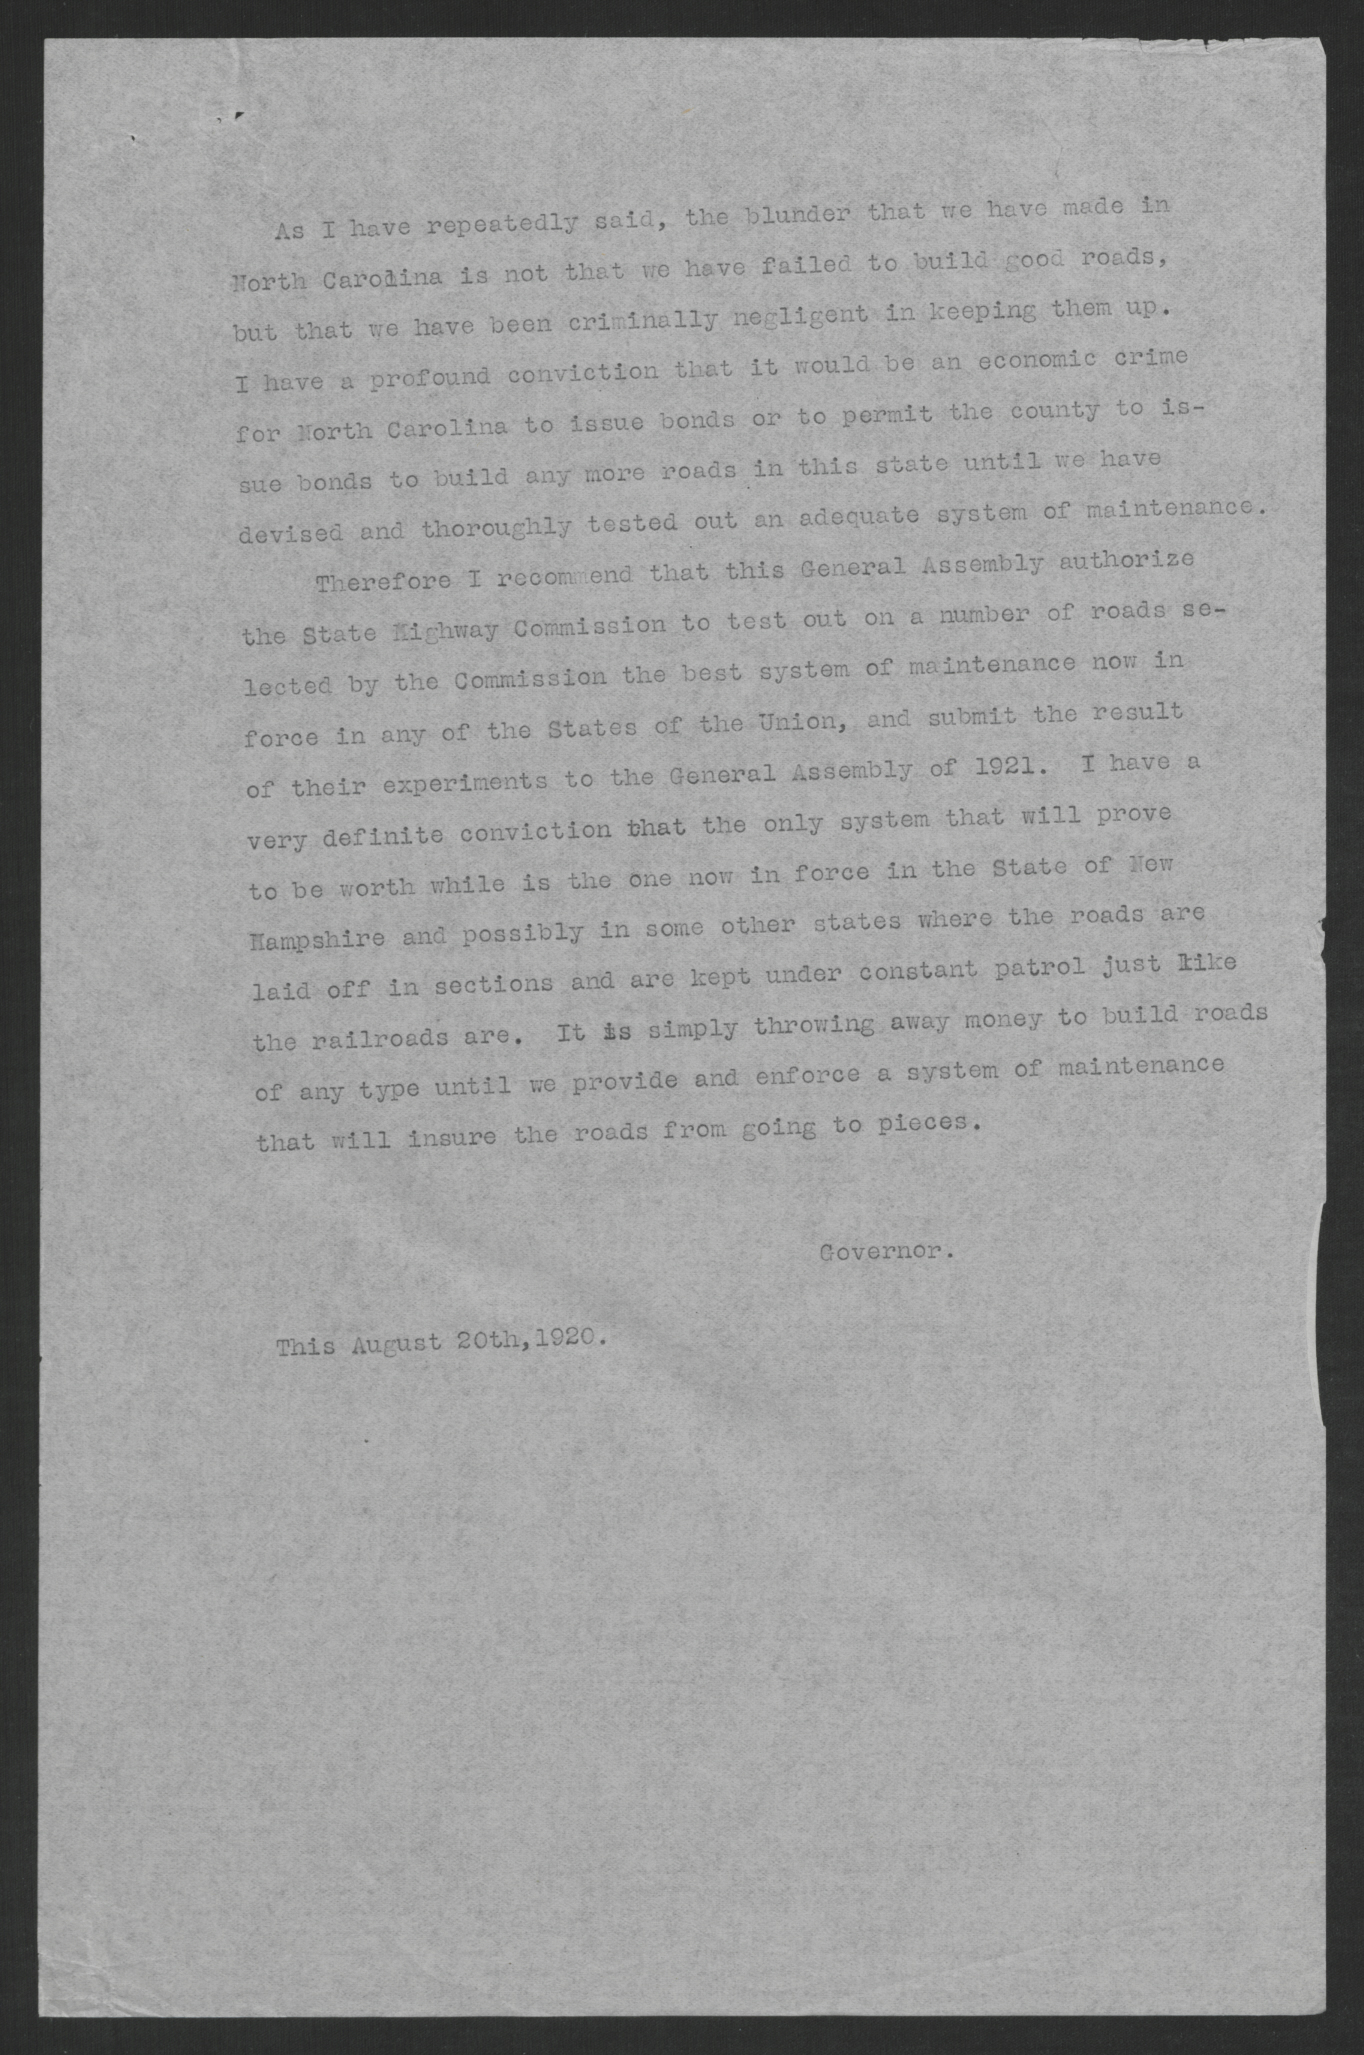 Sixth Message of Governor Thomas W. Bickett to the Special Session of the General Assembly, 20 August 1920, page 2